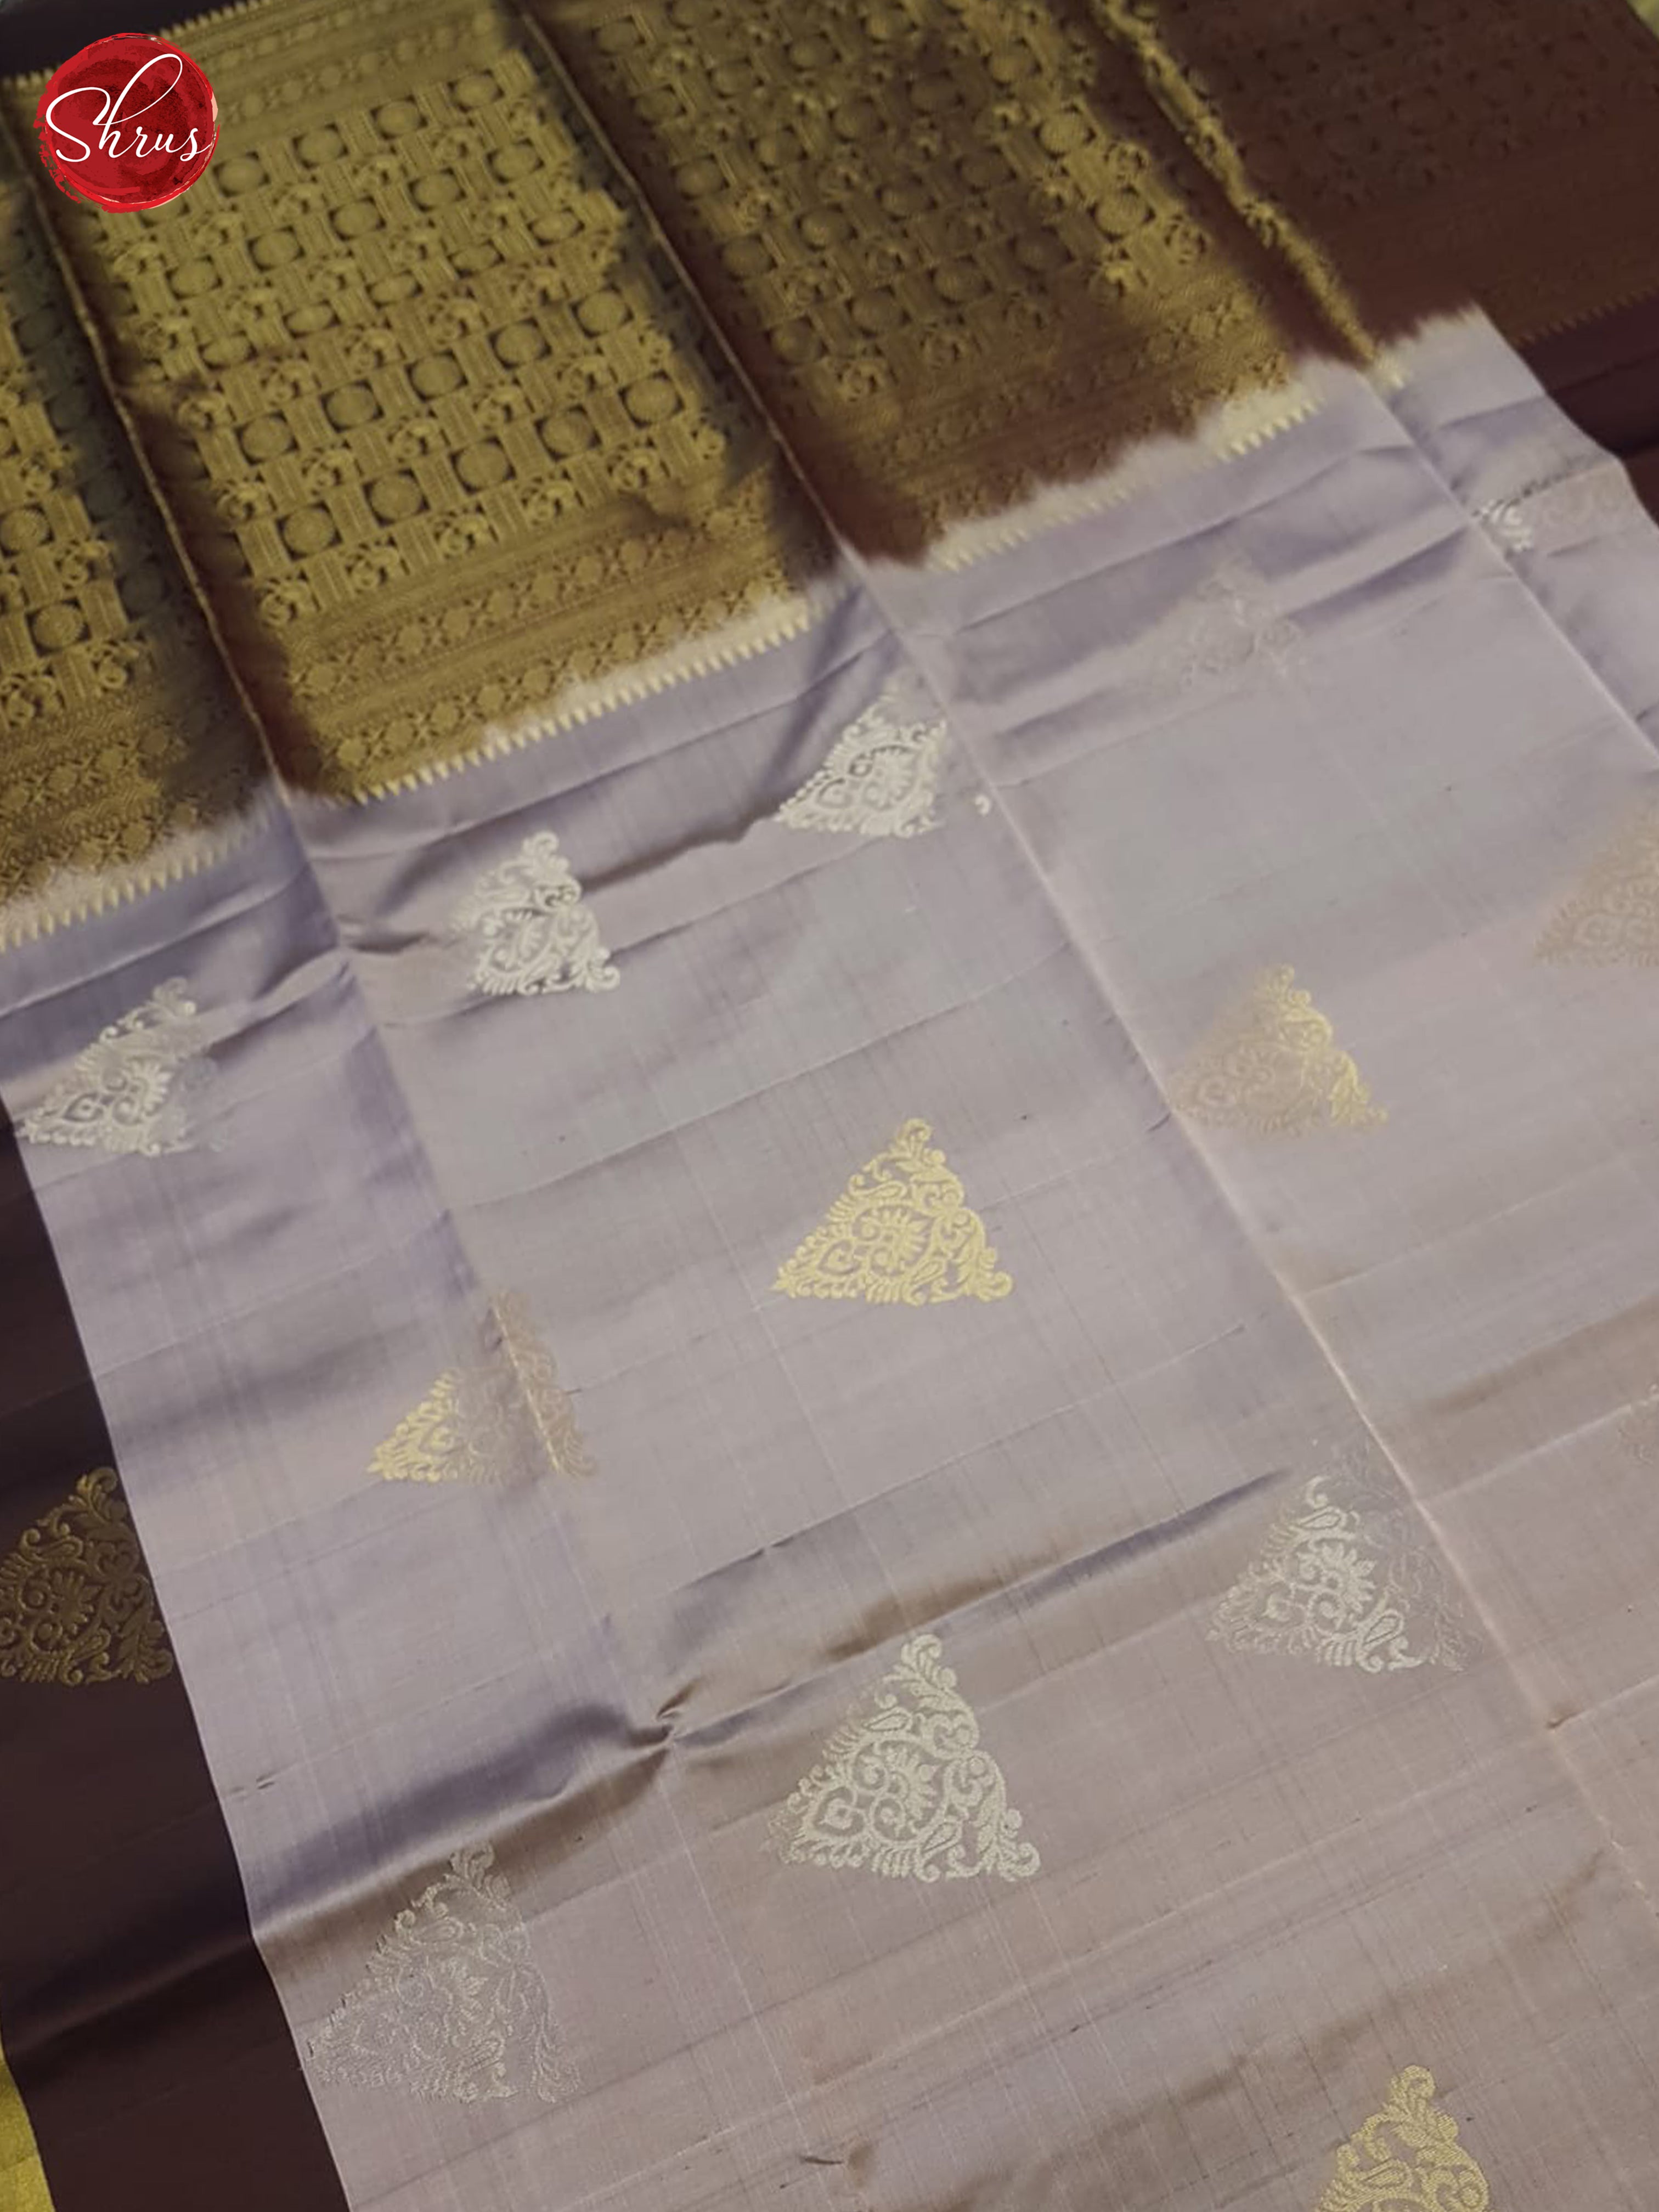 Dusty Lavender And Brown- Soft Silk Saree - Shop on ShrusEternity.com